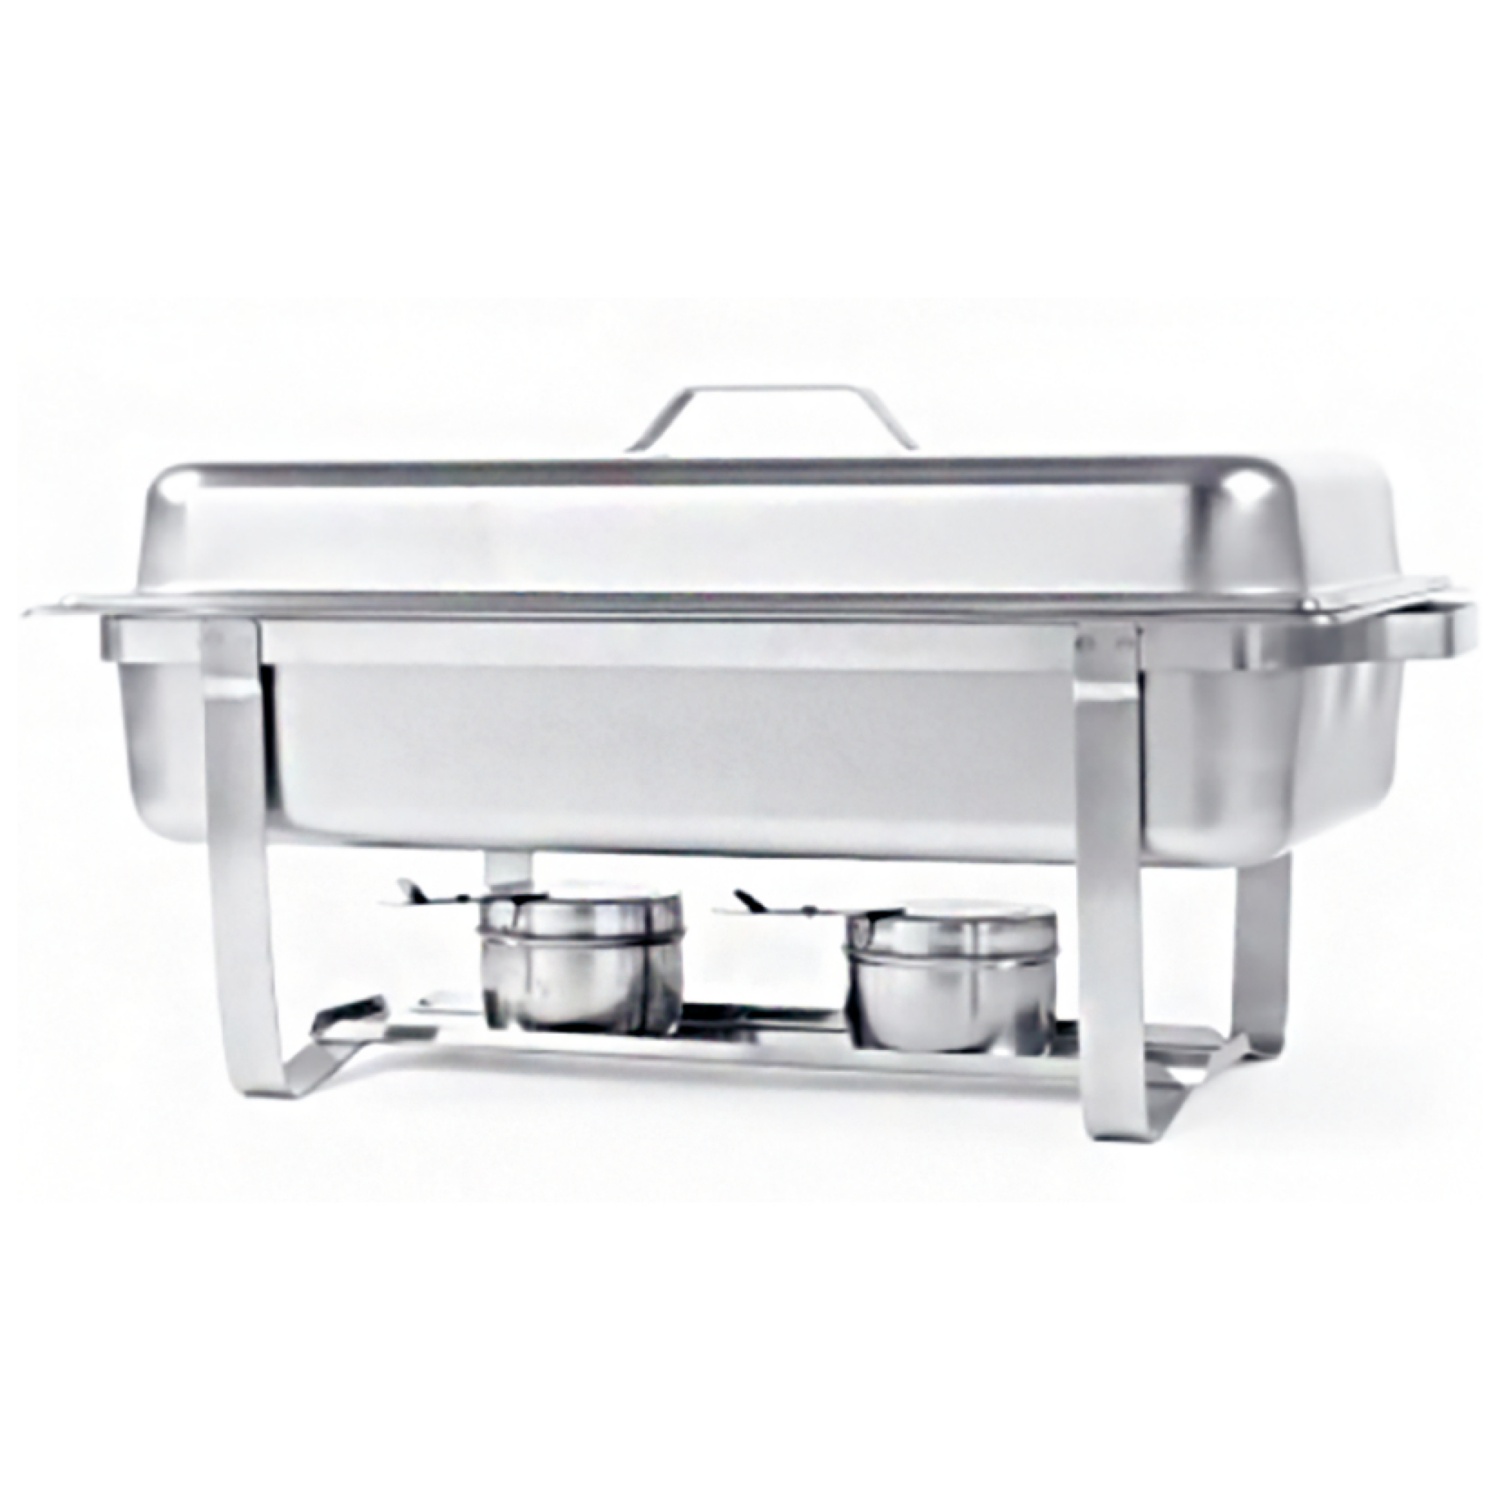 Hendi Chafing Dish Gastronorm